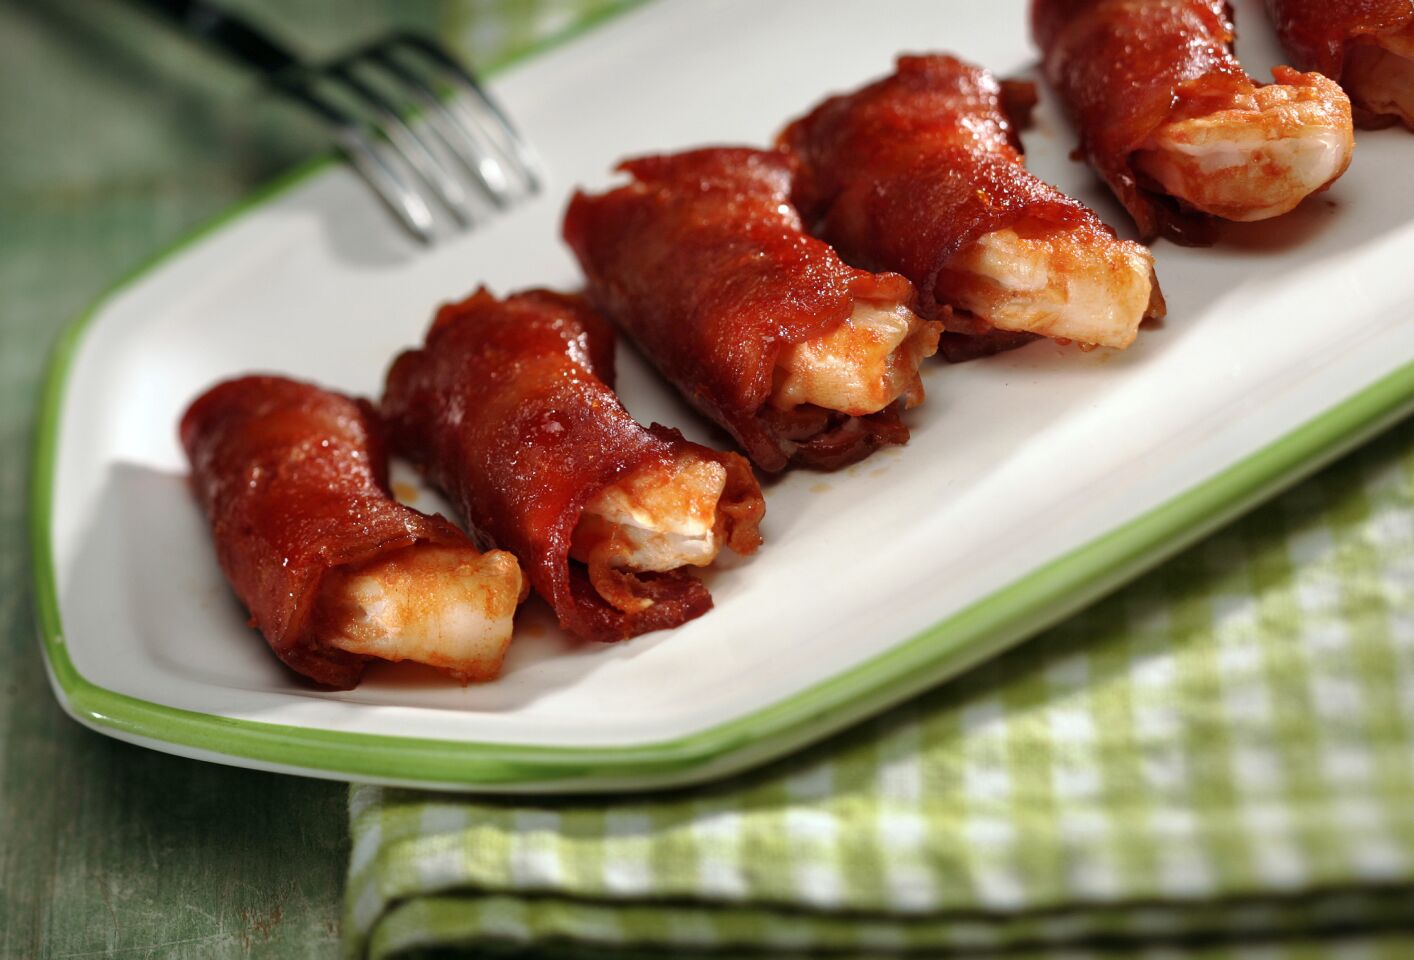 Wrap these shrimp in lean turkey bacon for a guilt-free snack sure to please every guest.